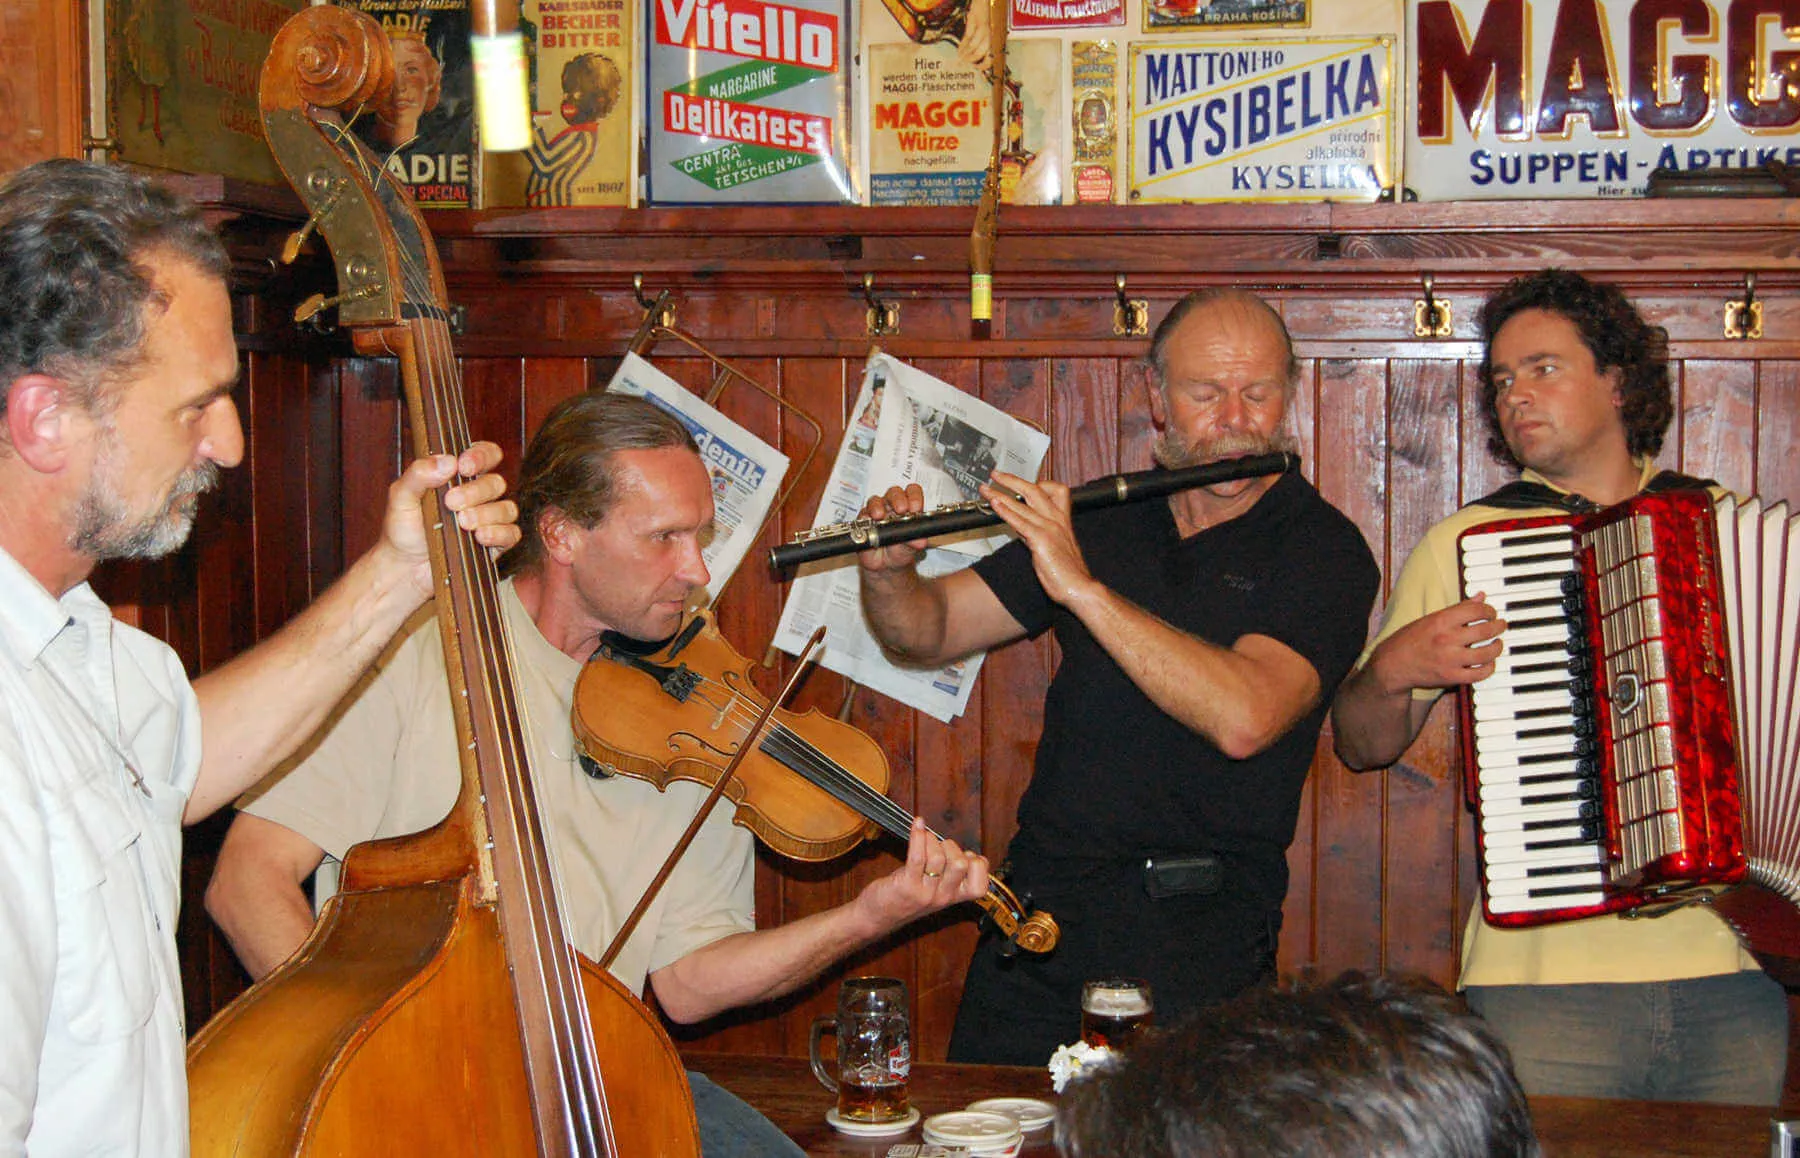 The band plays on in a small-town Czech bar few tourists would think to frequent